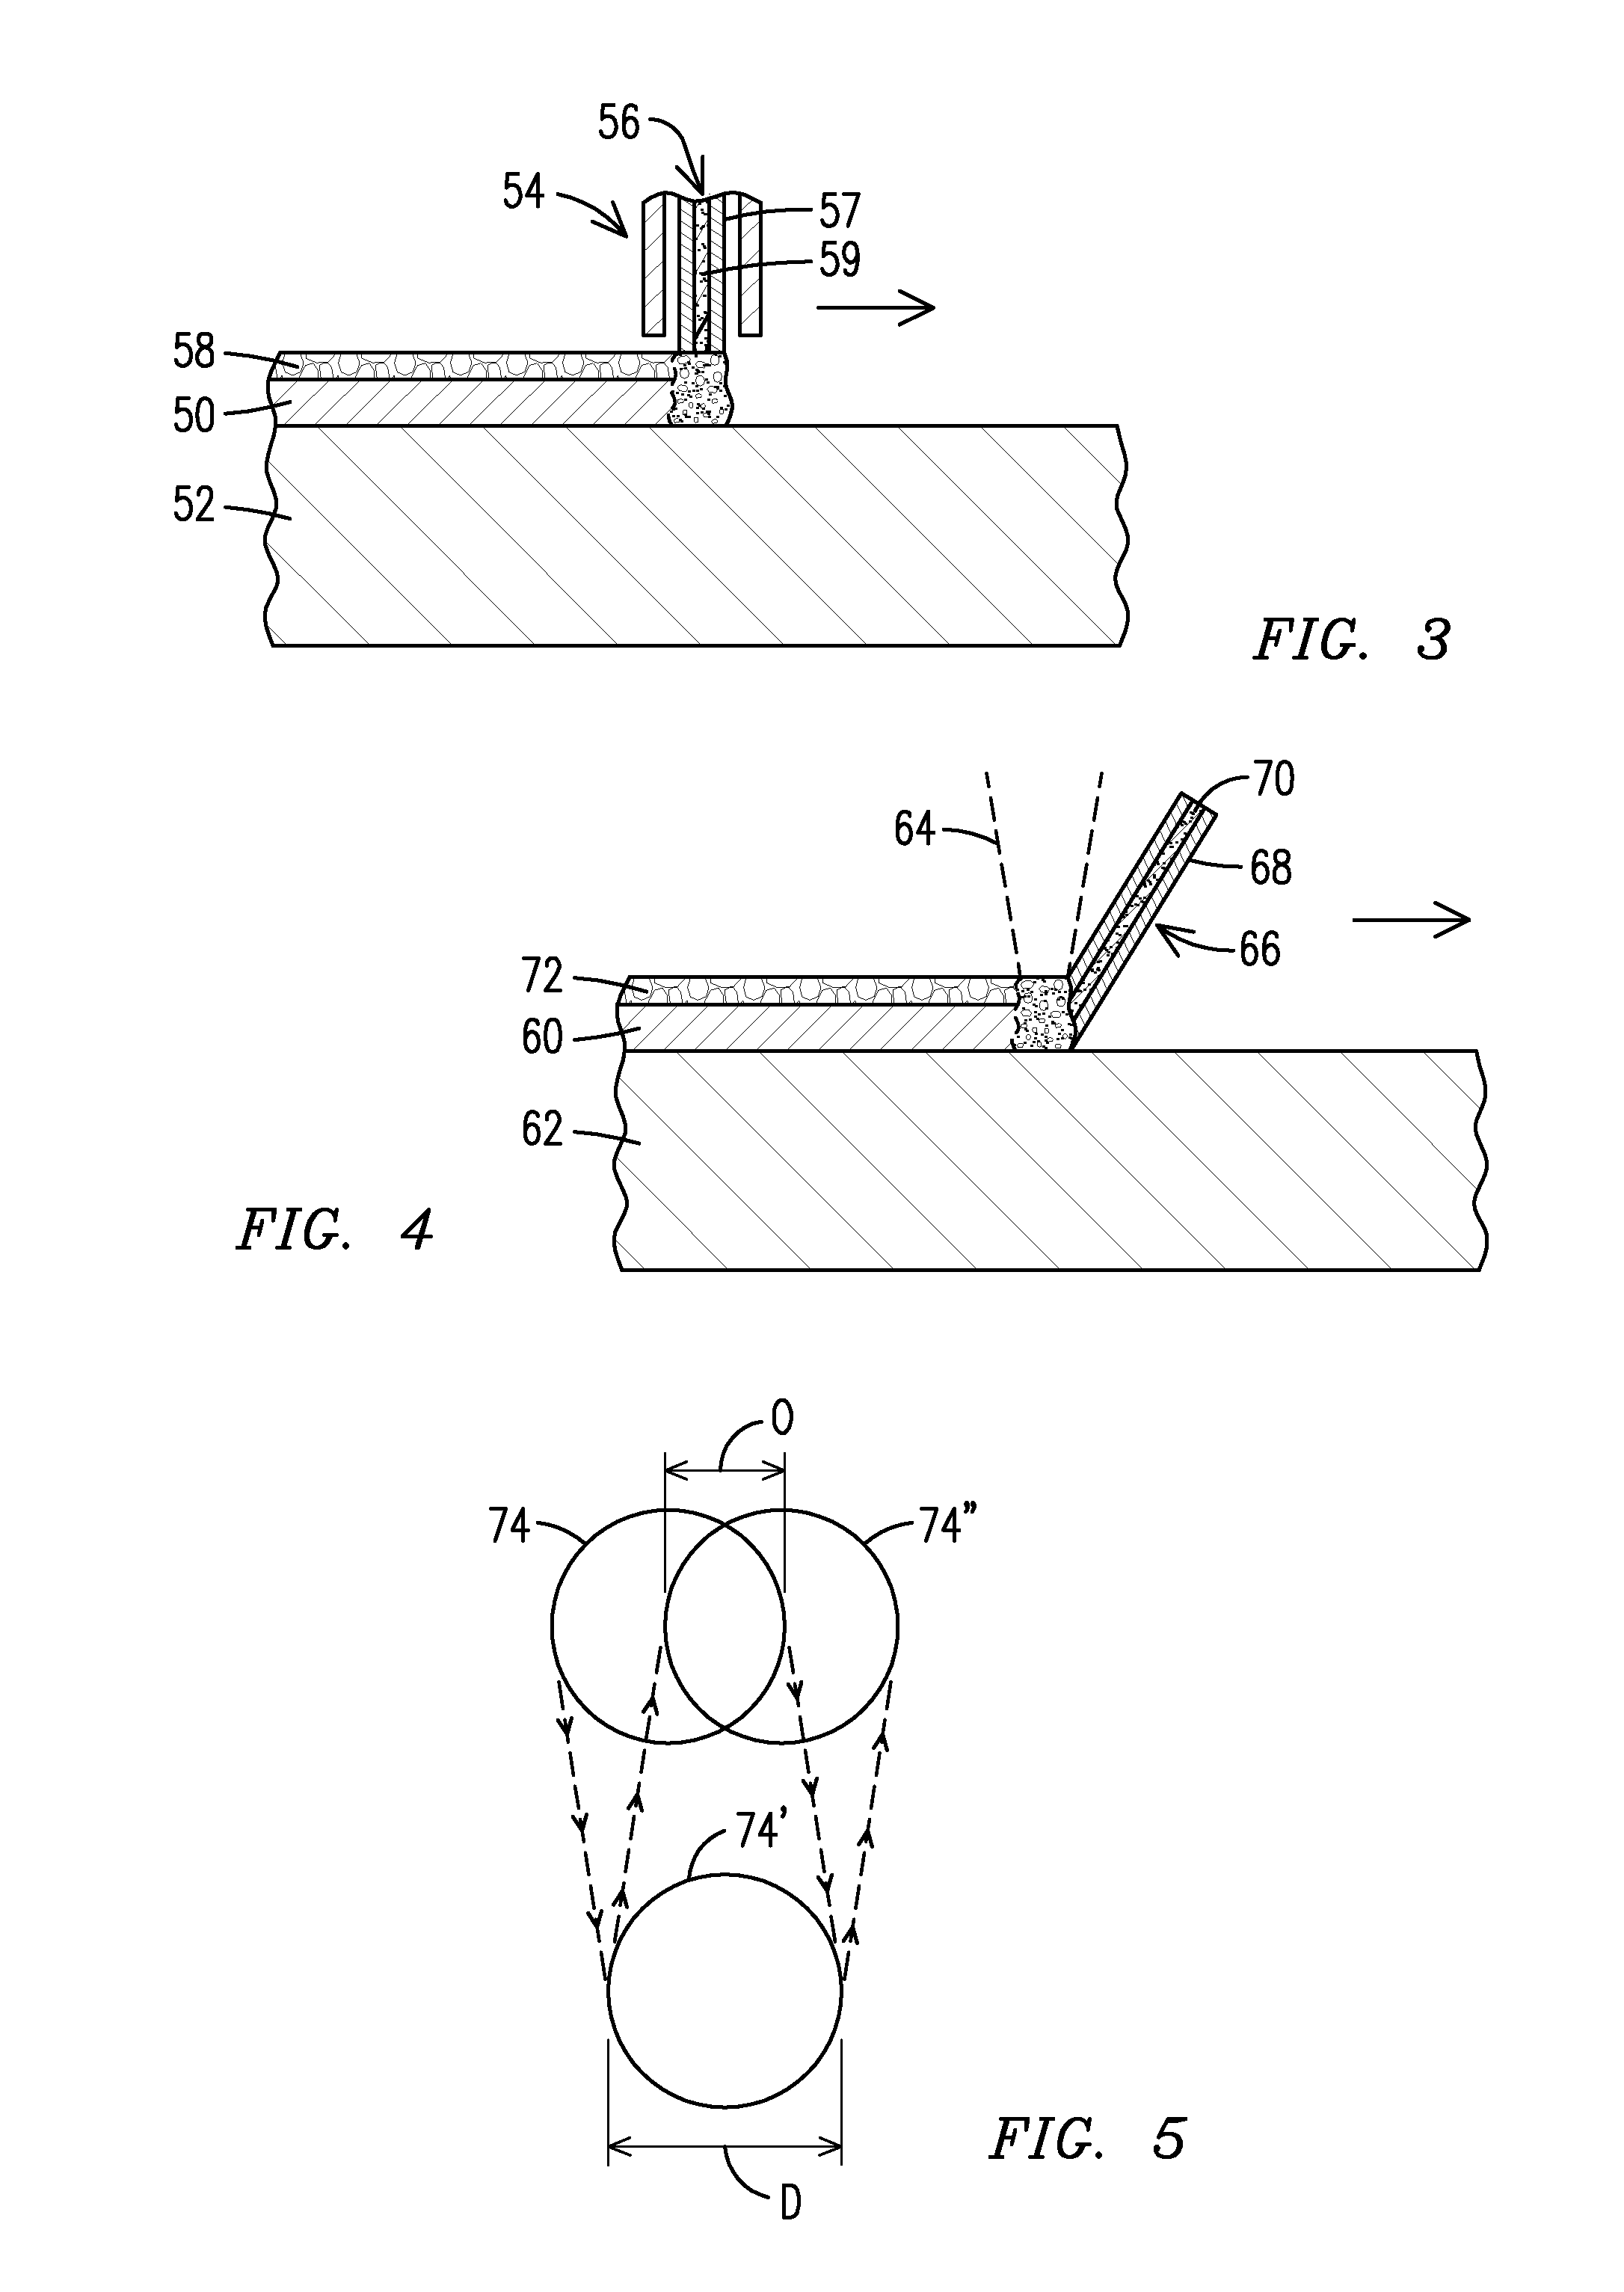 Deposition of superalloys using powdered flux and metal